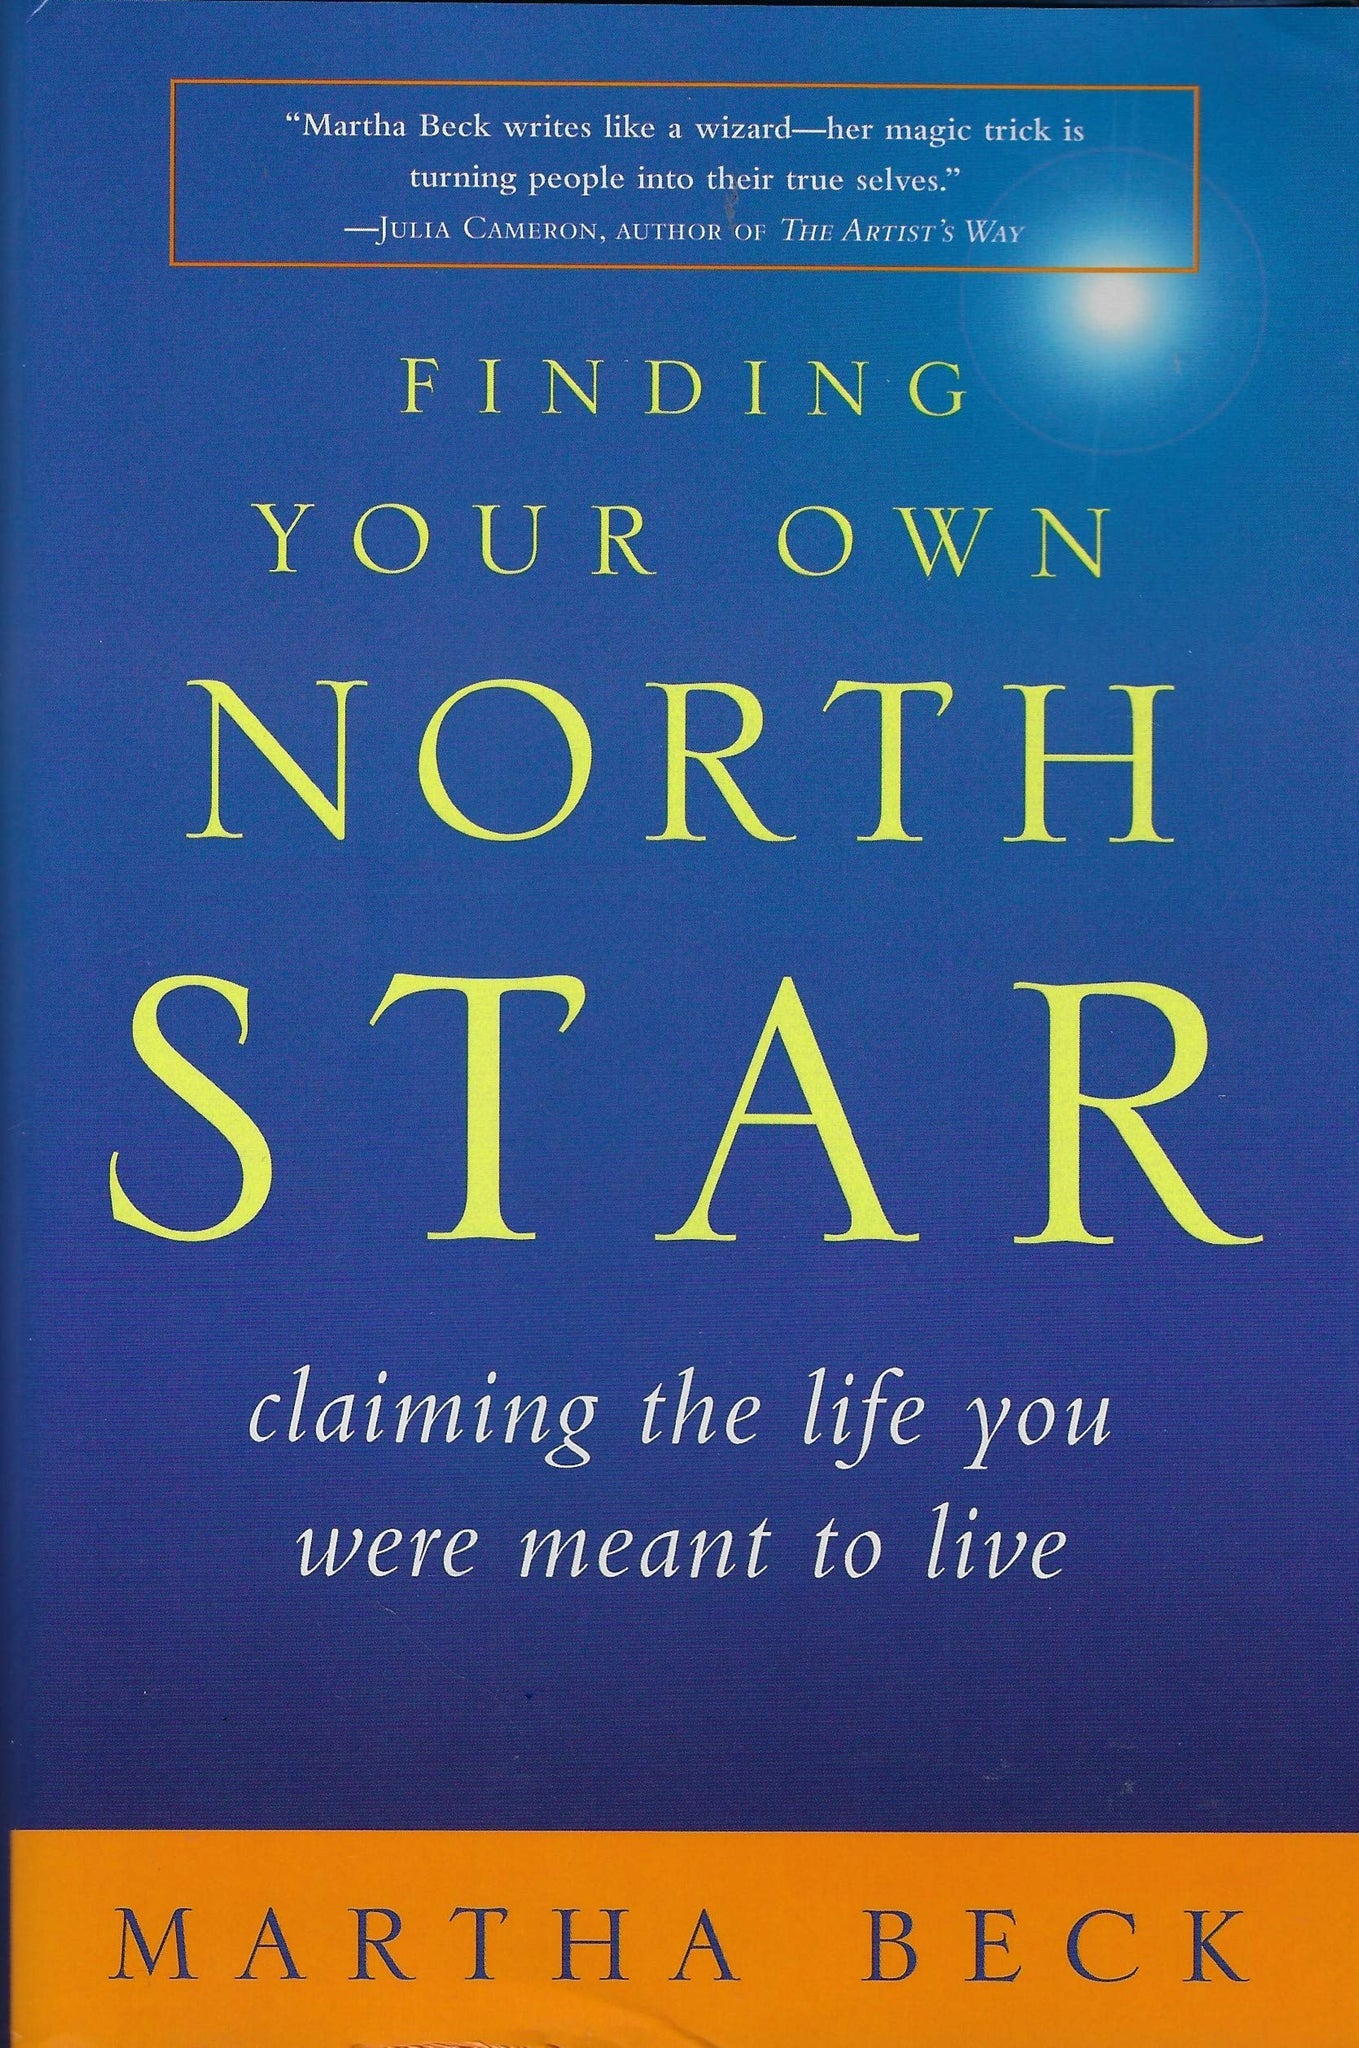 Finding Your Own North Star: Claiming the Life You Were Meant to Live by Martha N. Beck